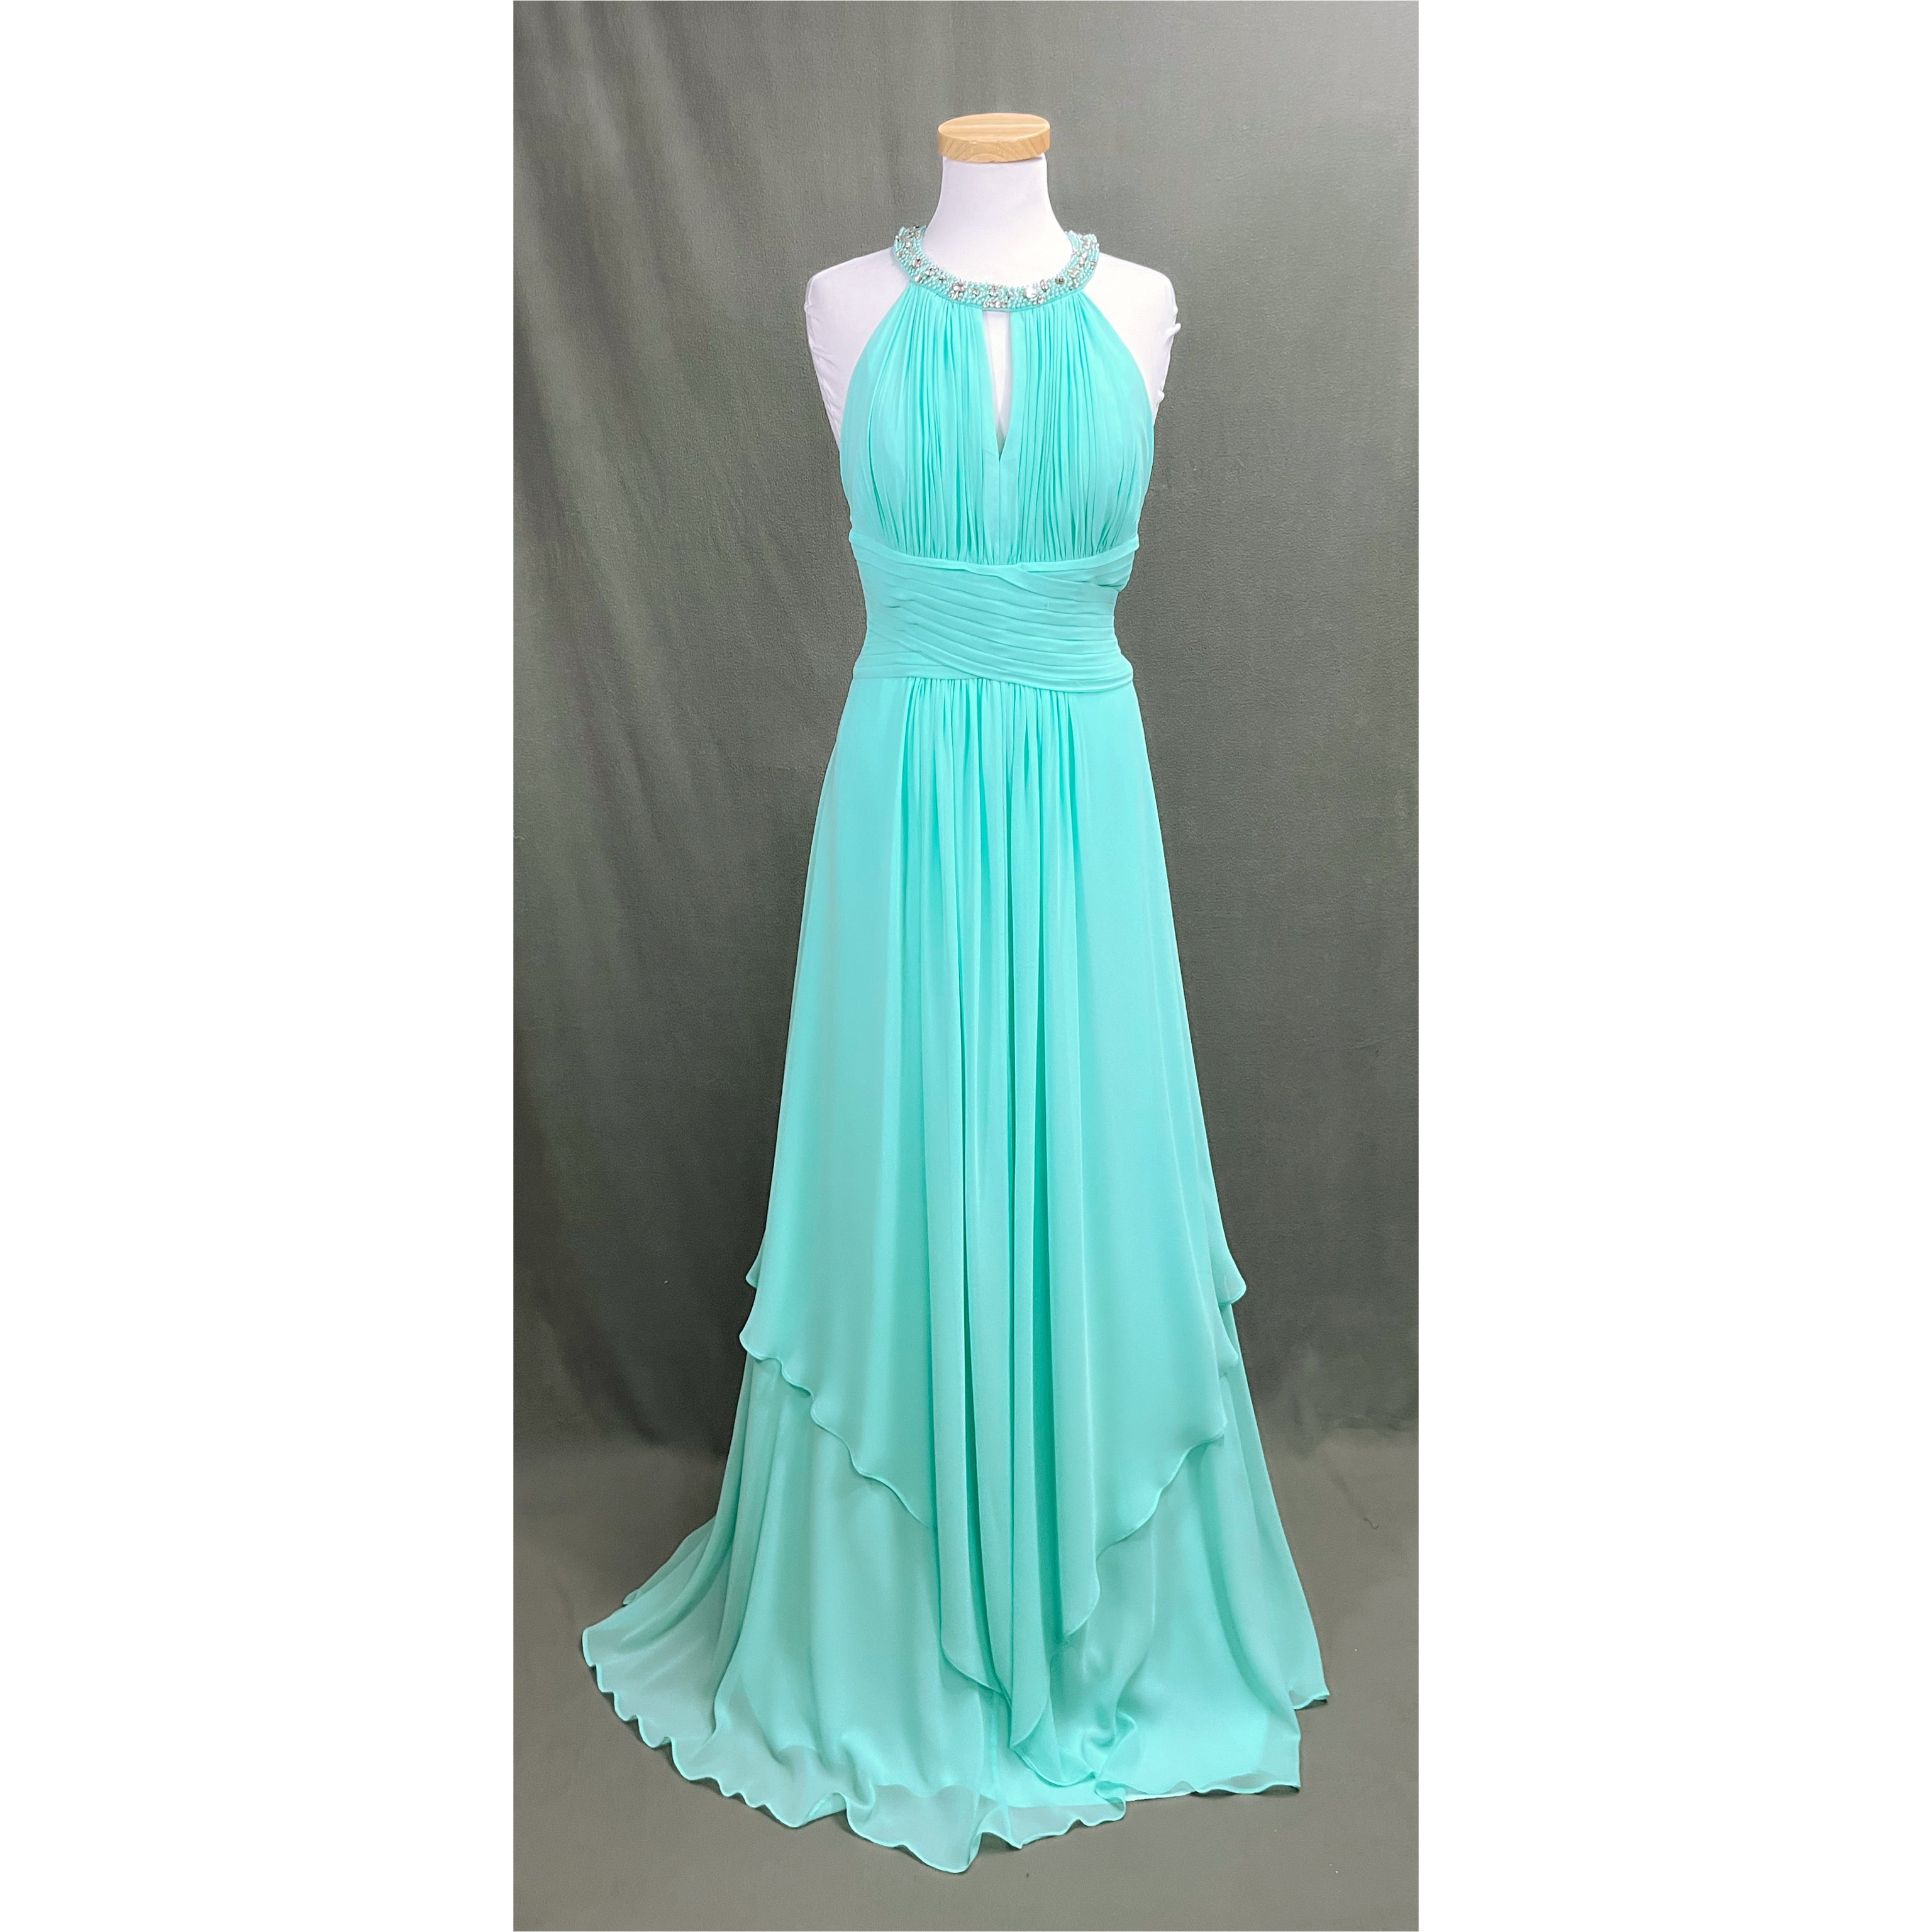 Donna Morgan spearmint dress, size 10, NEW WITH TAGS!